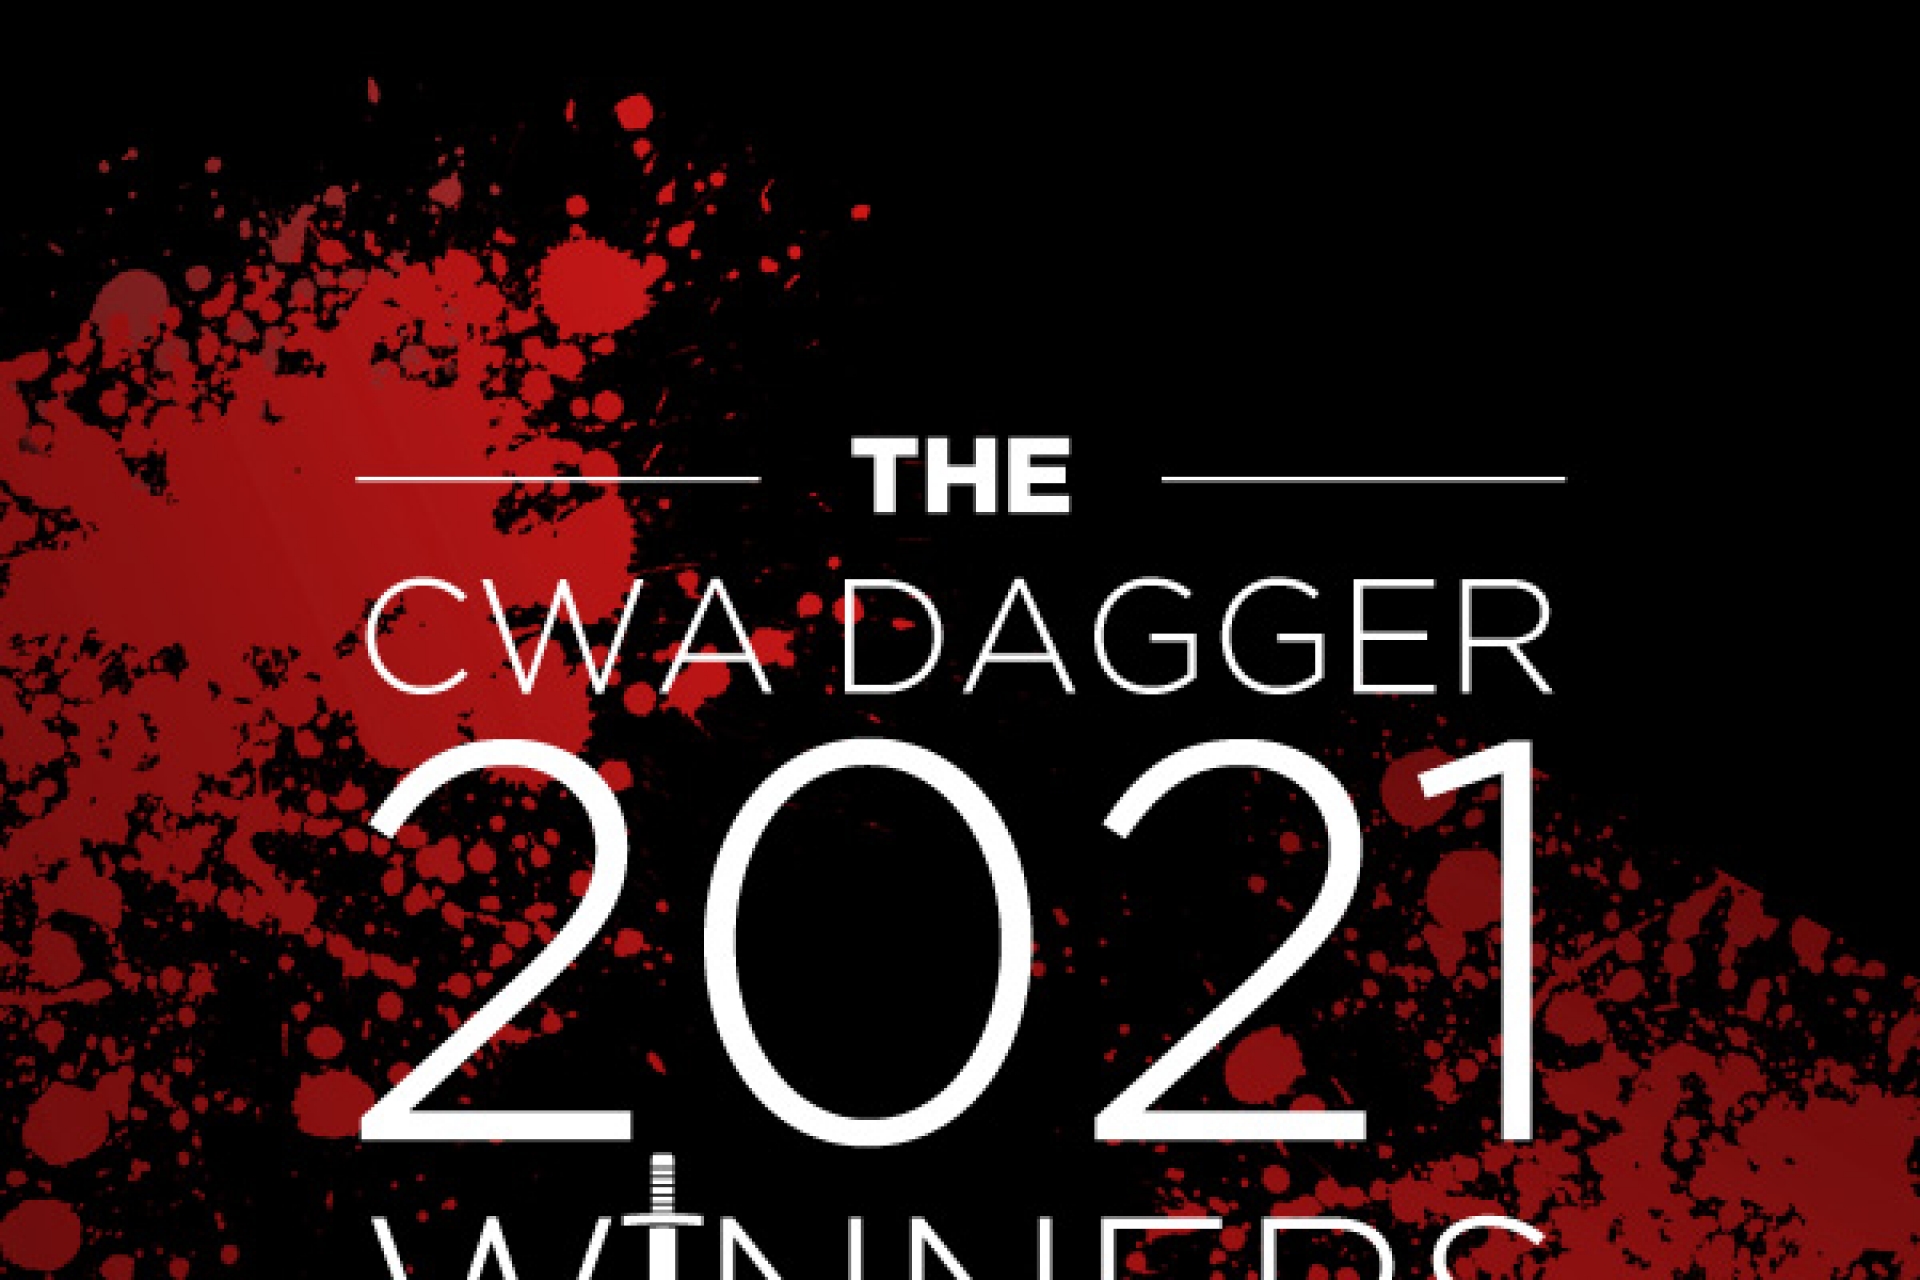 A triumphant night at the CWA Dagger Awards for Chris Whitaker